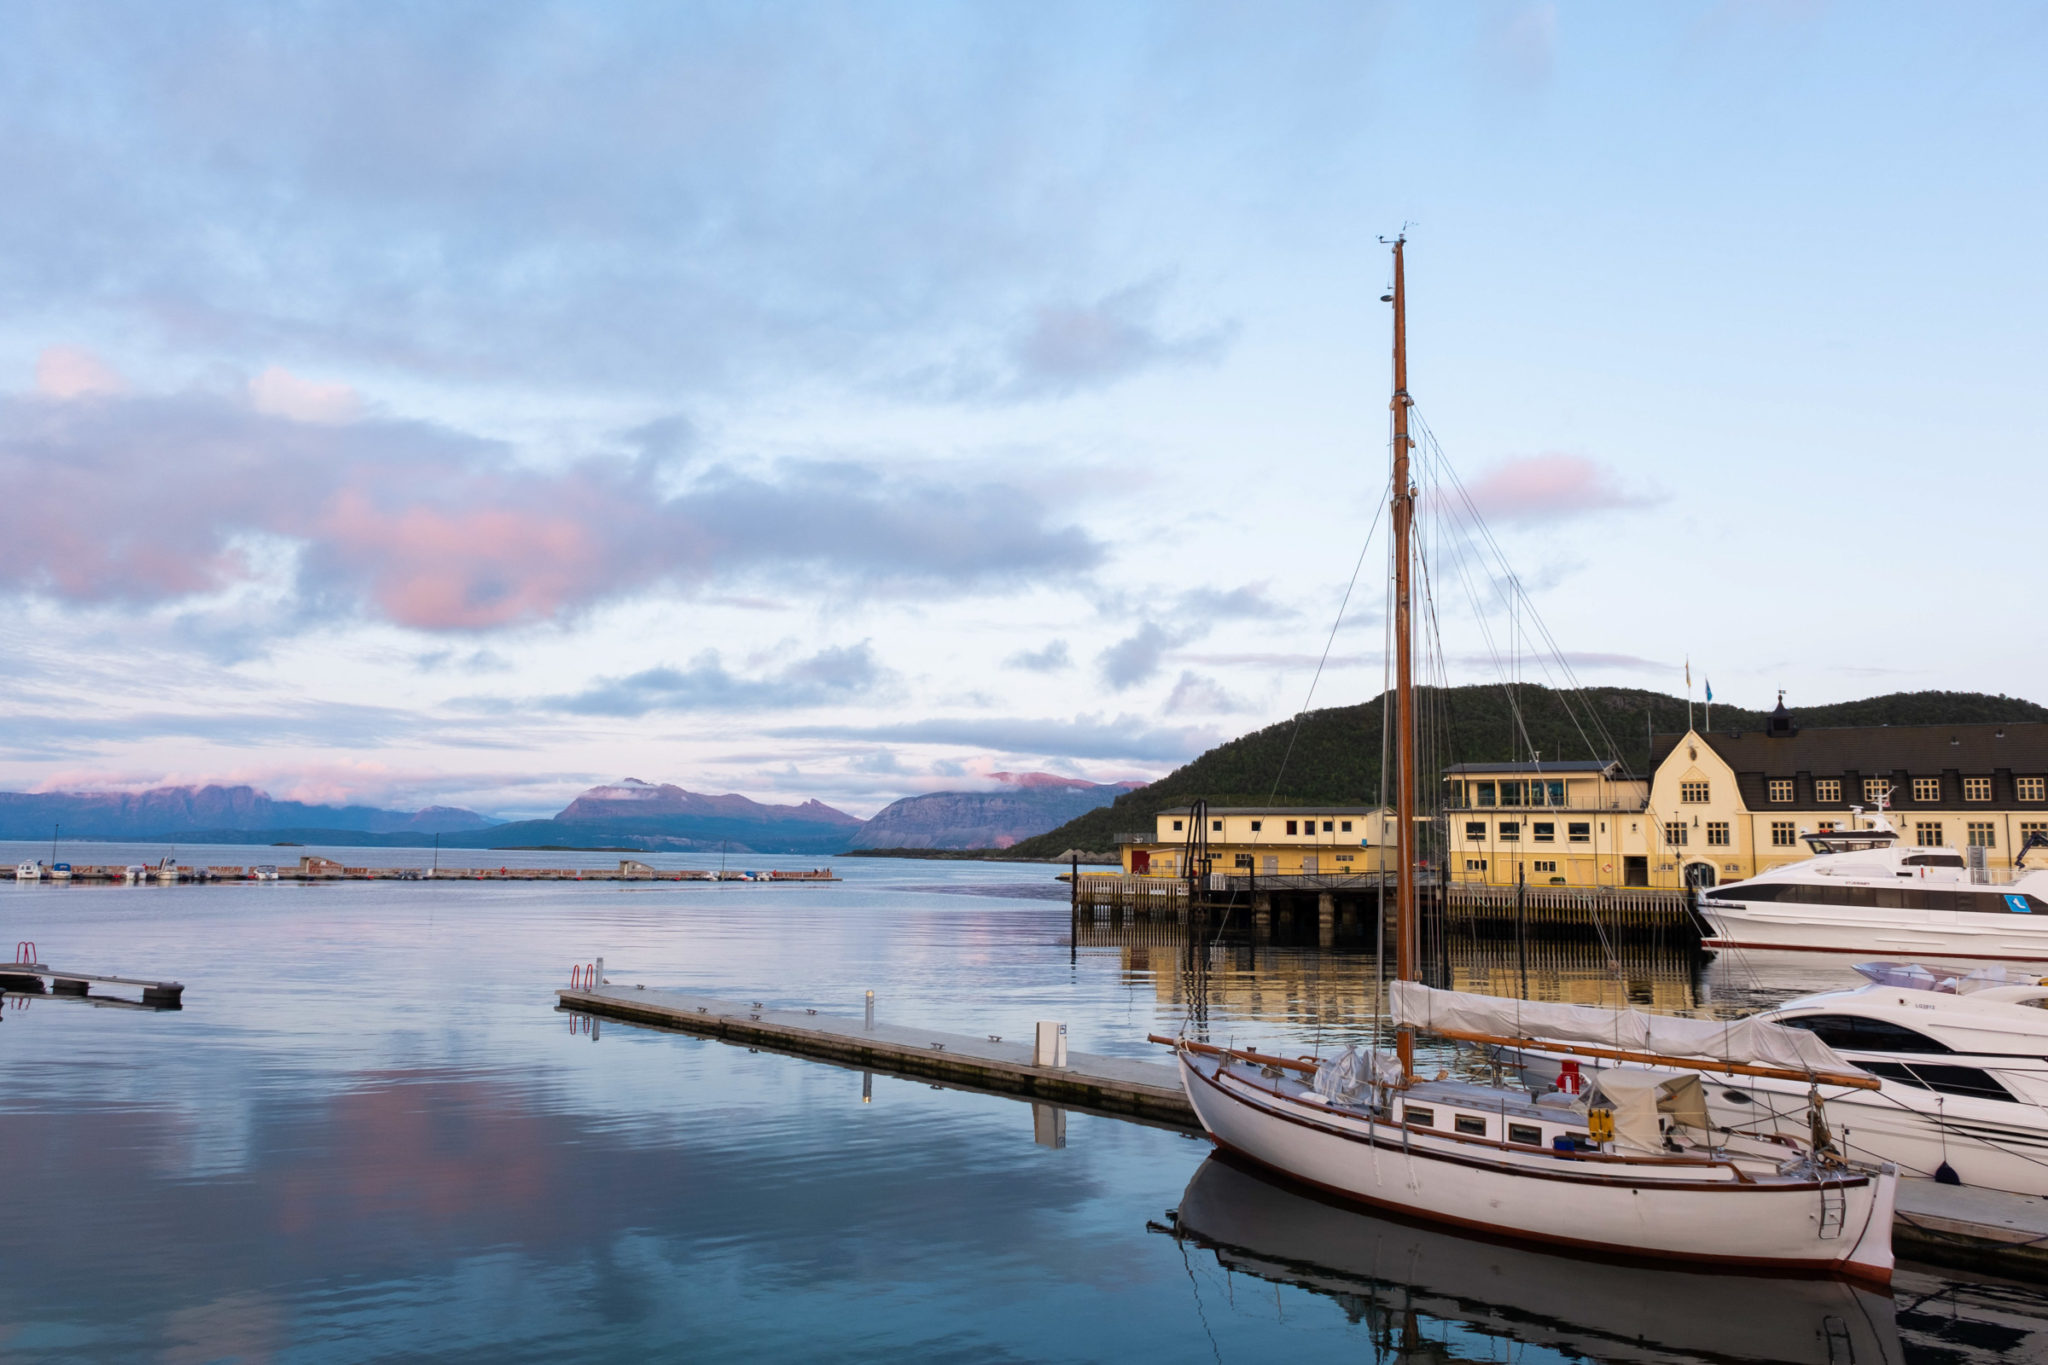 The port of Harstad with a view towards the Vågsfjorden © David Buettner